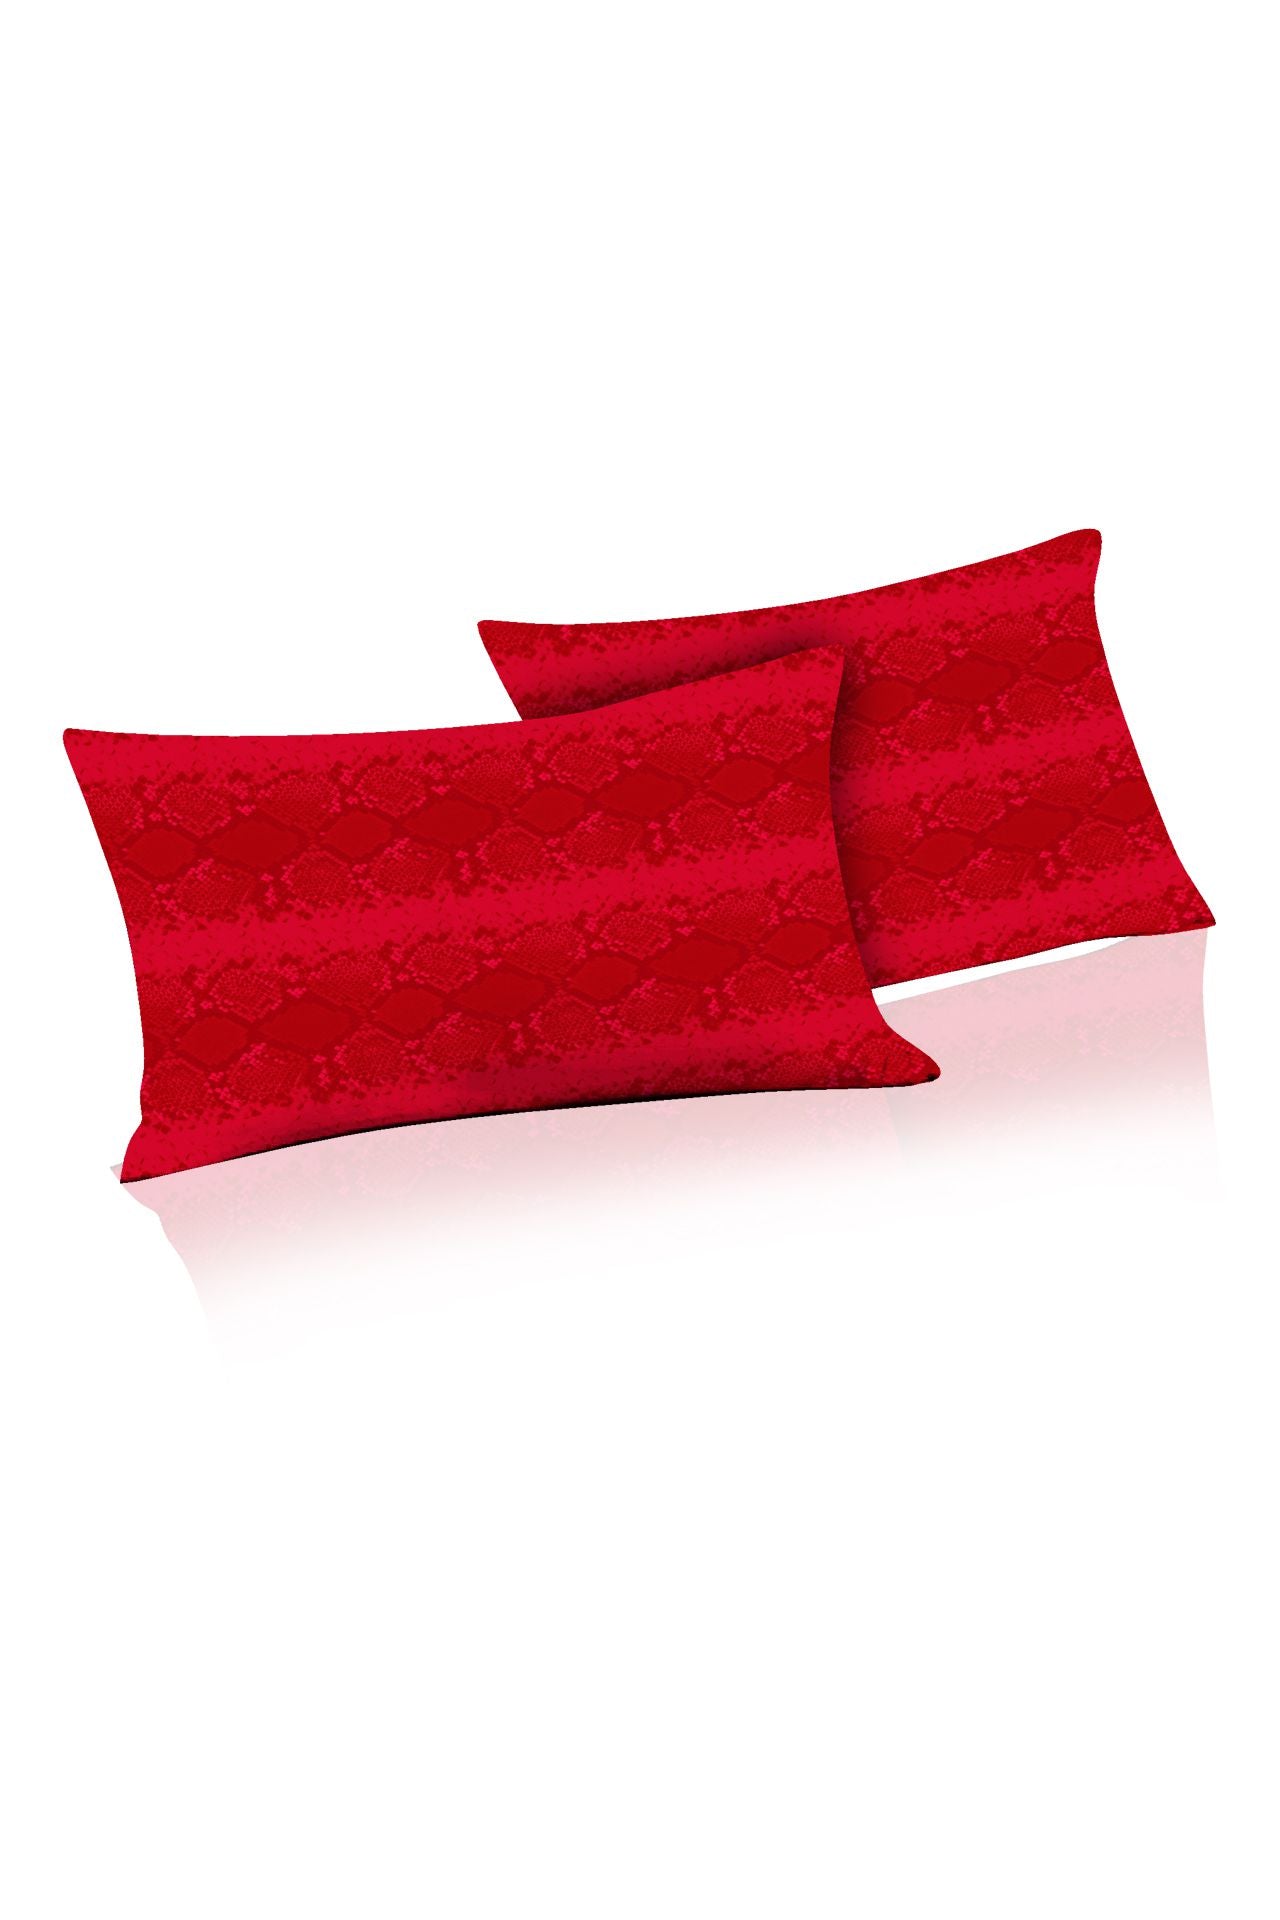 Red Pillow Cover Made With Cupro